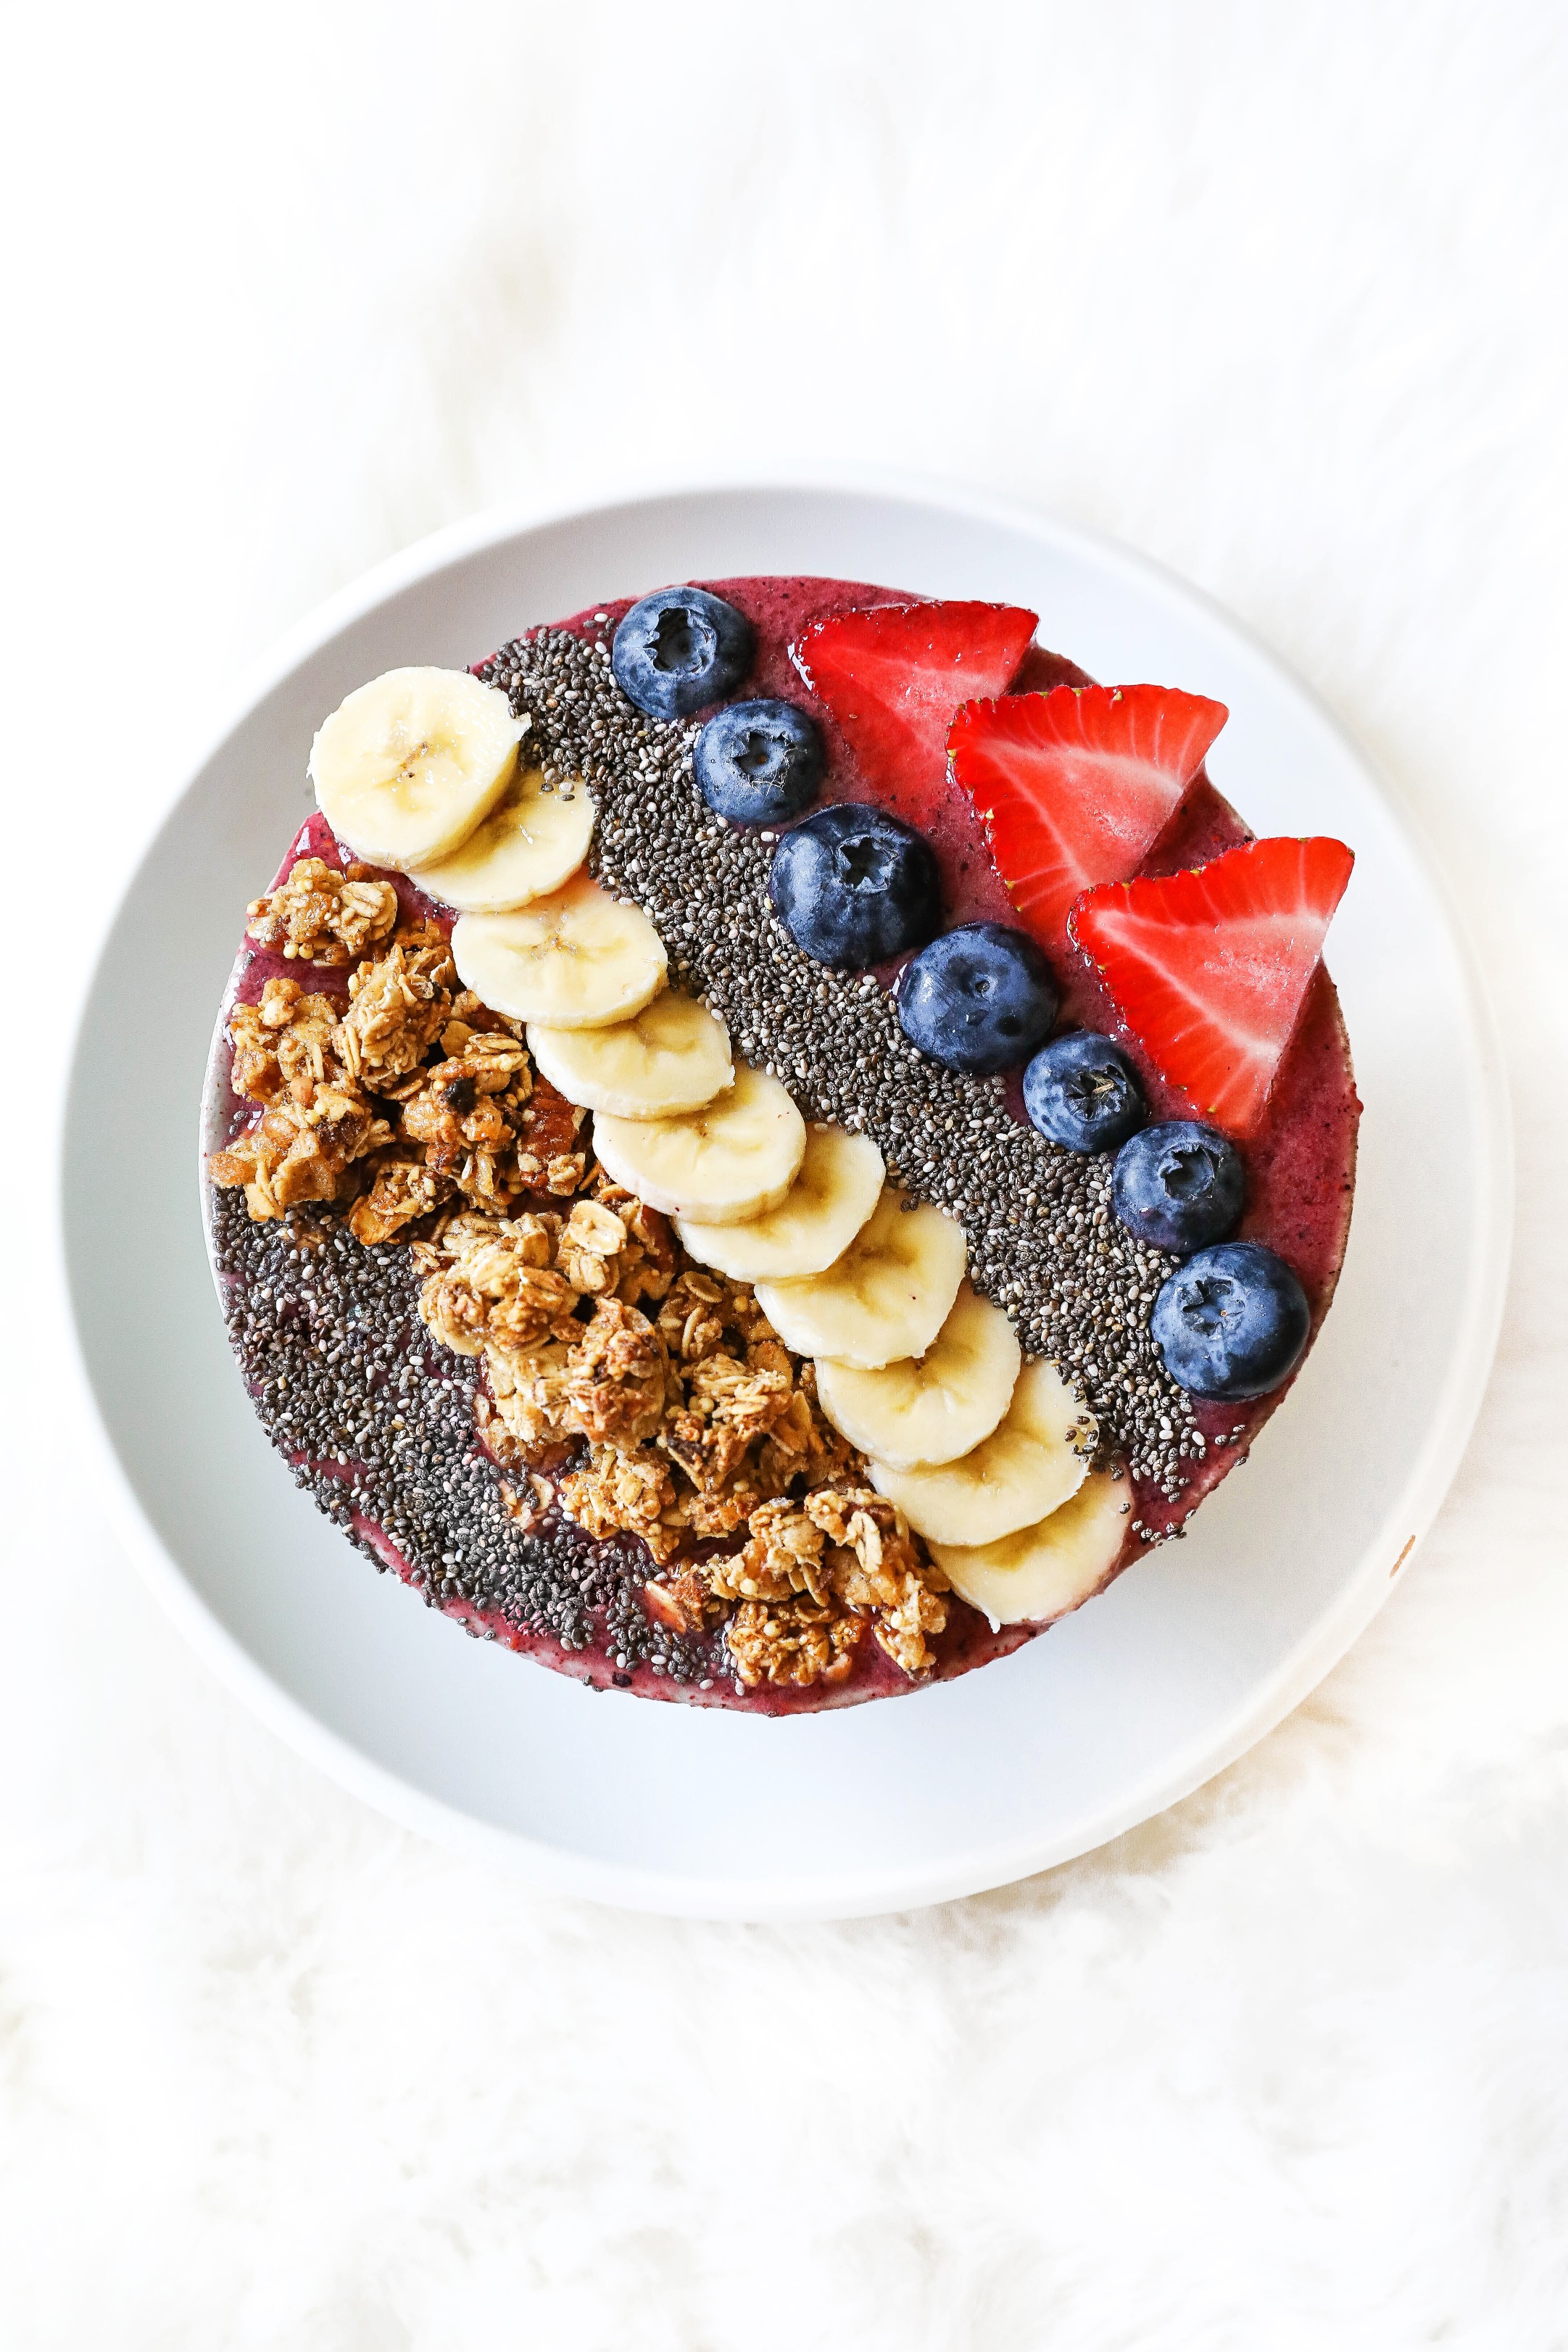 Smoothie bowl with acai, bananas, strawberries, blueberries, chia seeds, granola, and more! Healthy breakfast ideas! Easy low calorie recipe on the blogpost what I eat in a day! Details on lifestyle blog daily dose of charm by lauren lindmark